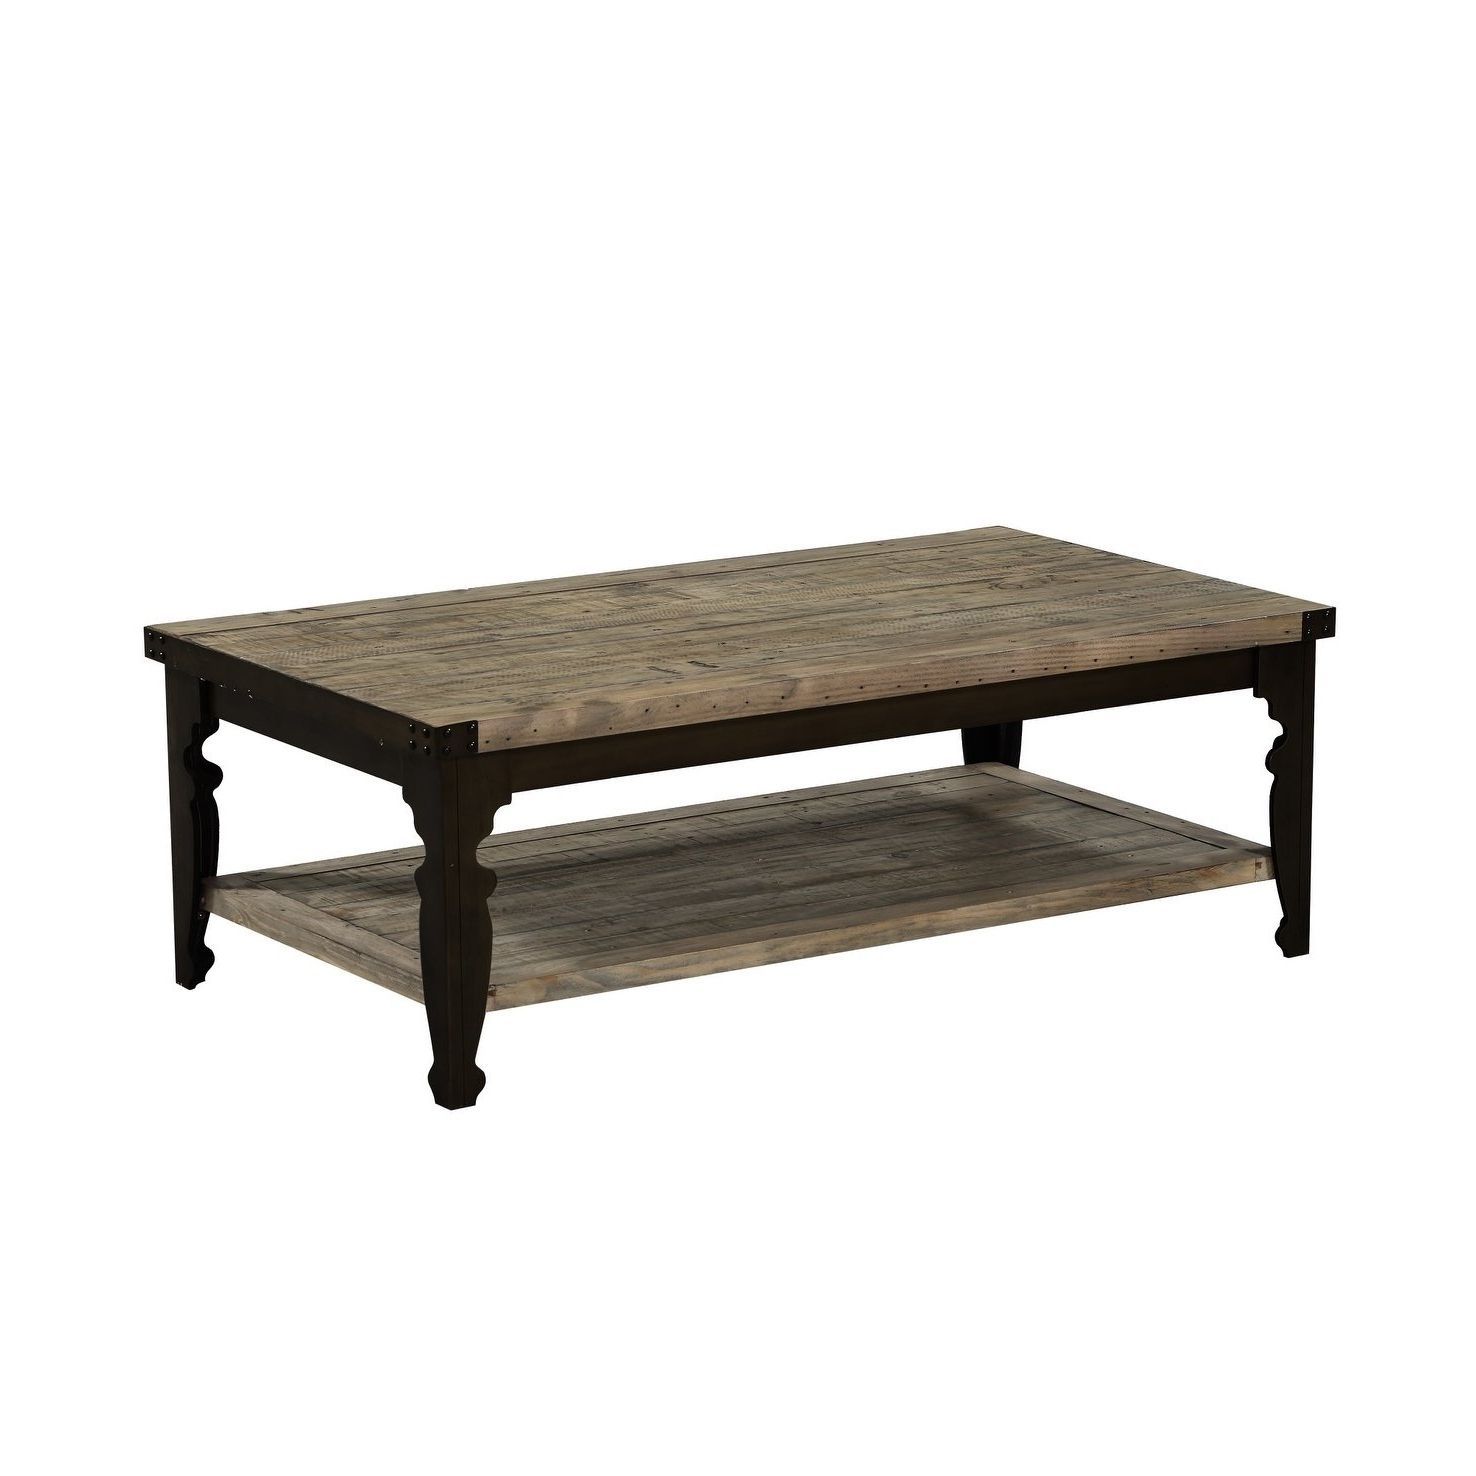 Most Popular Reclaimed Pine Coffee Tables Intended For Shop Emerald Home Valencia Reclaimed Pine Coffee Table – Free (View 17 of 20)